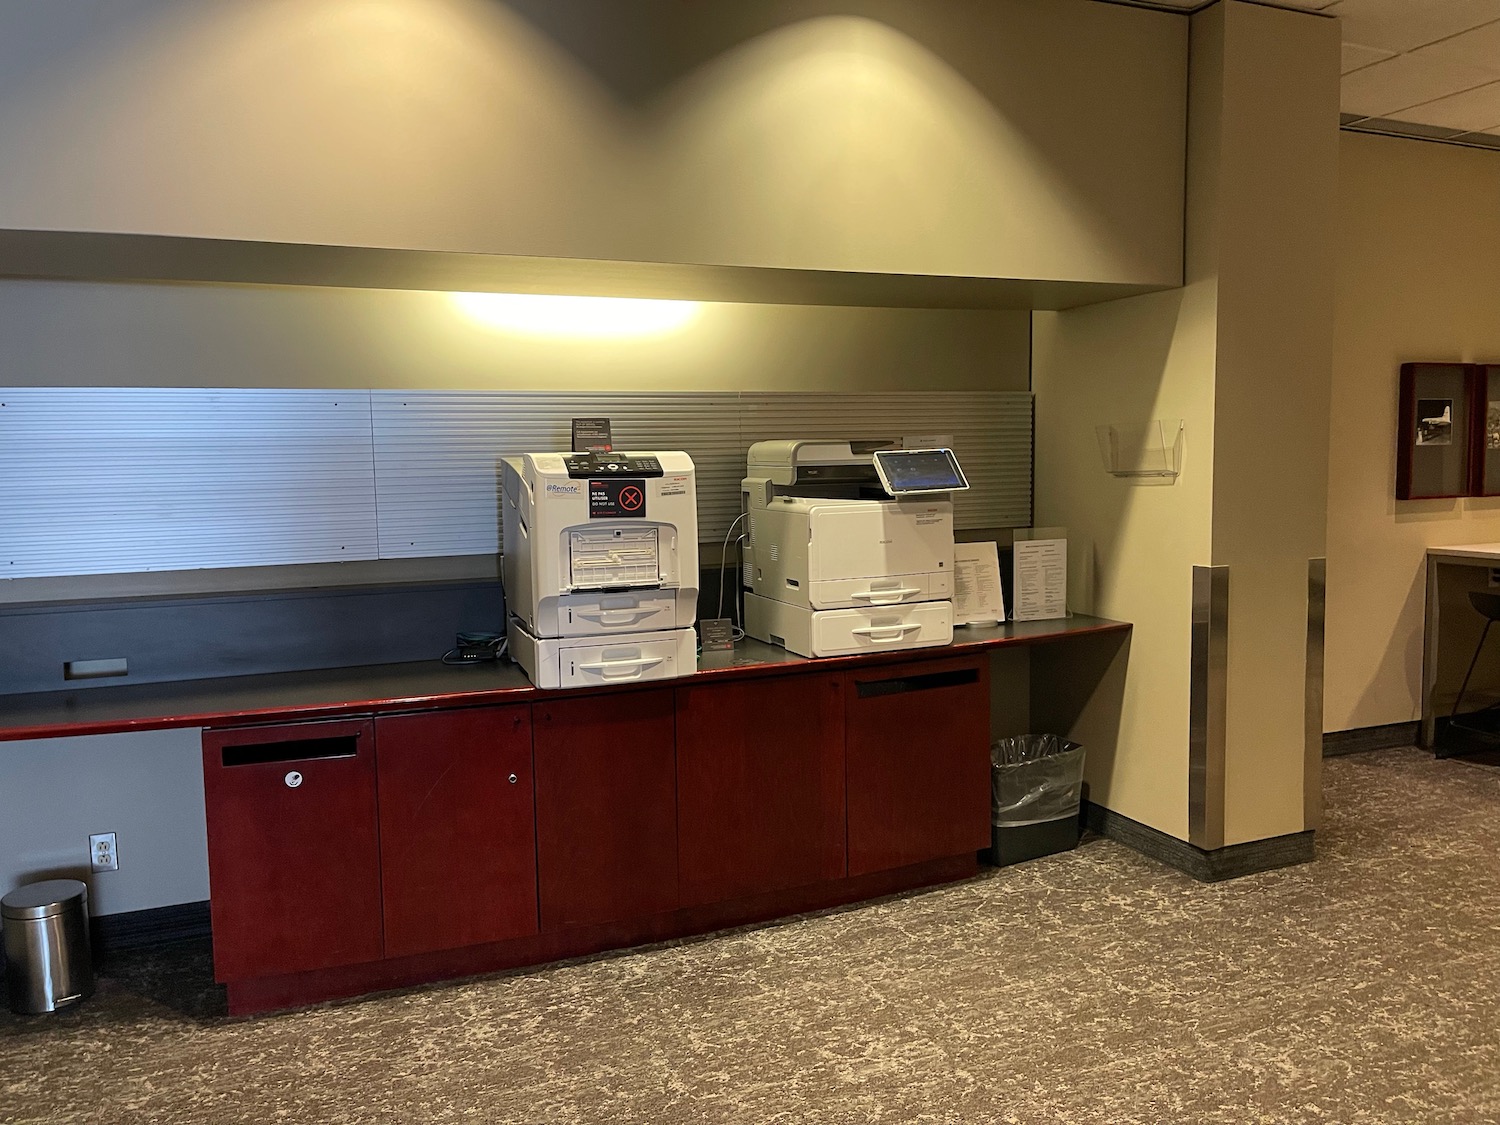 a large printer on a counter